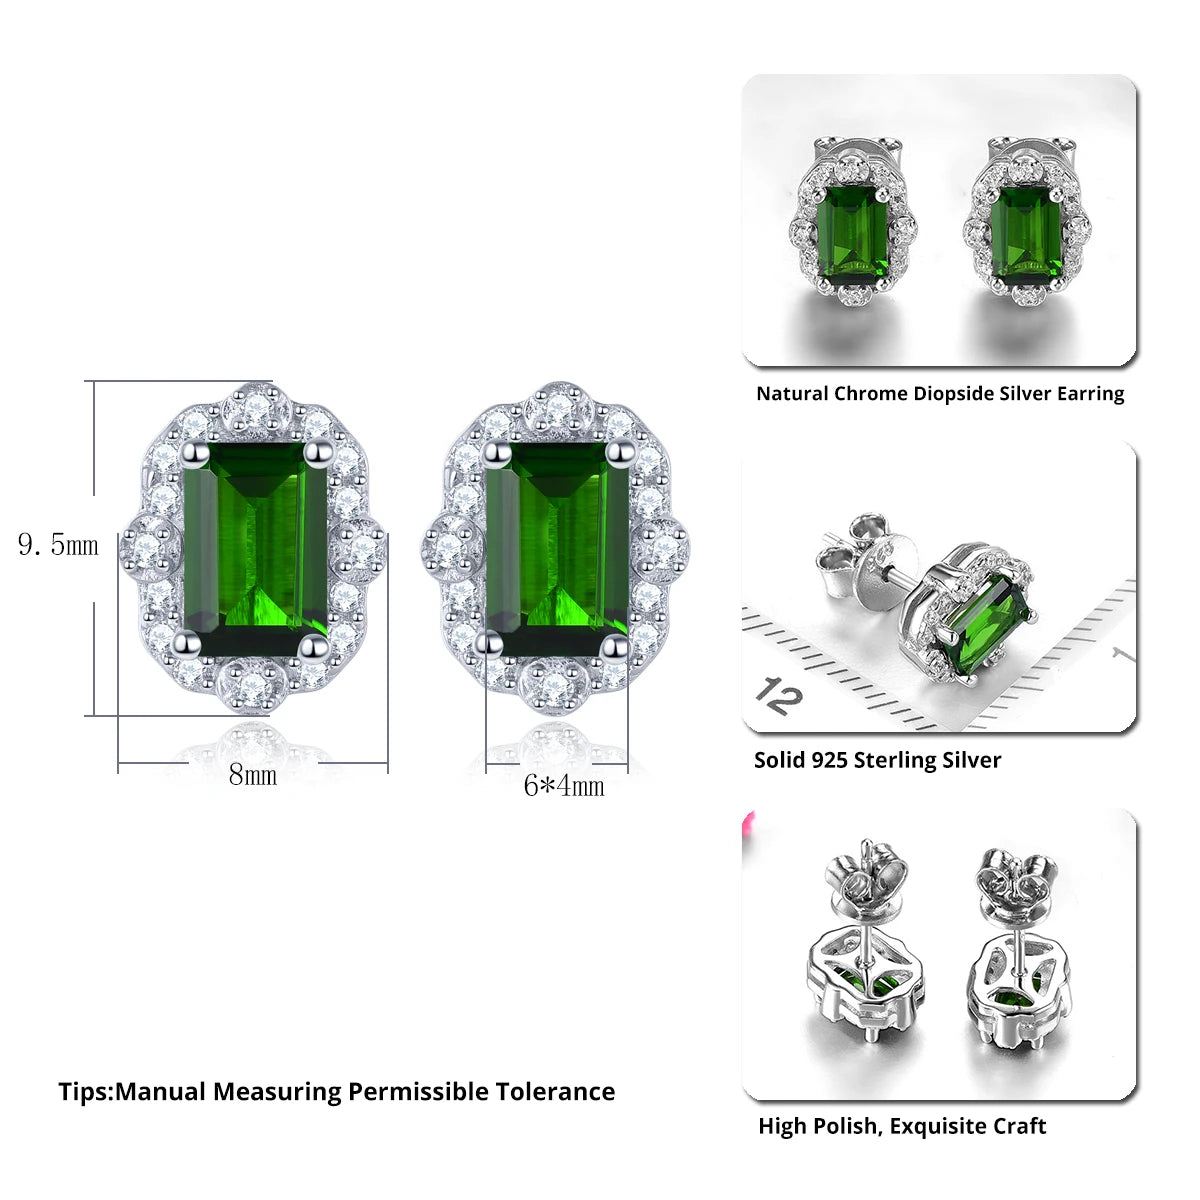 Natural Chrome Diopside Solid Silver Stud Earrings 1 Carat Octagon Cut Classic Genuine Gemstone Jewelrys Women Gifts Top Quality